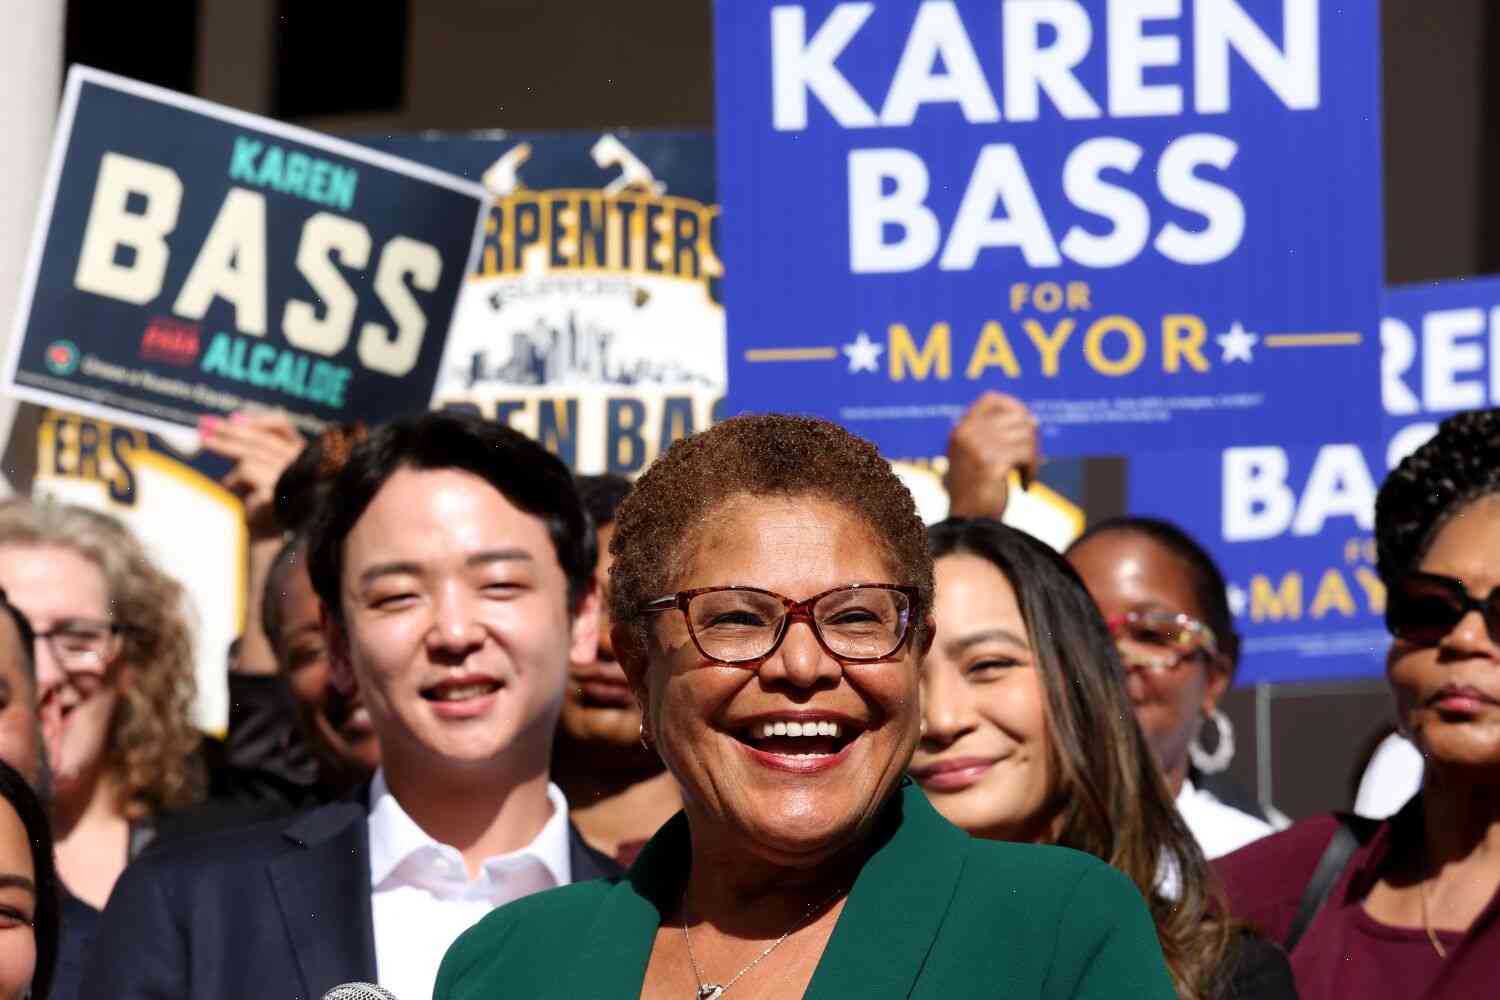 Karen Bass, the first African American woman elected mayor, joins the race for the 48th mayor